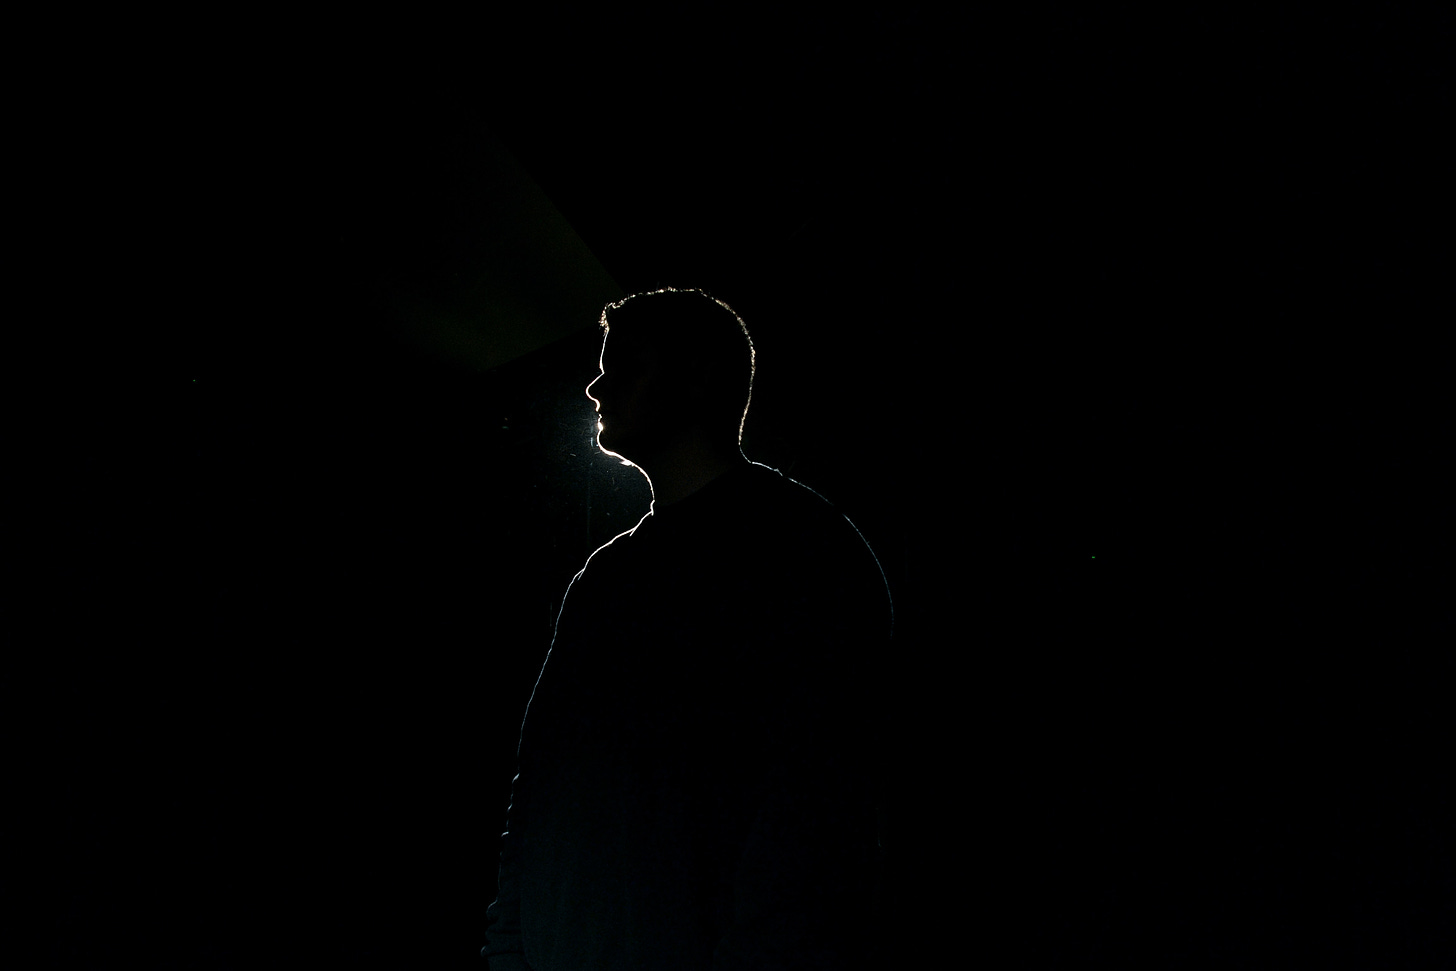 Silhouette of a man plausibly onstage